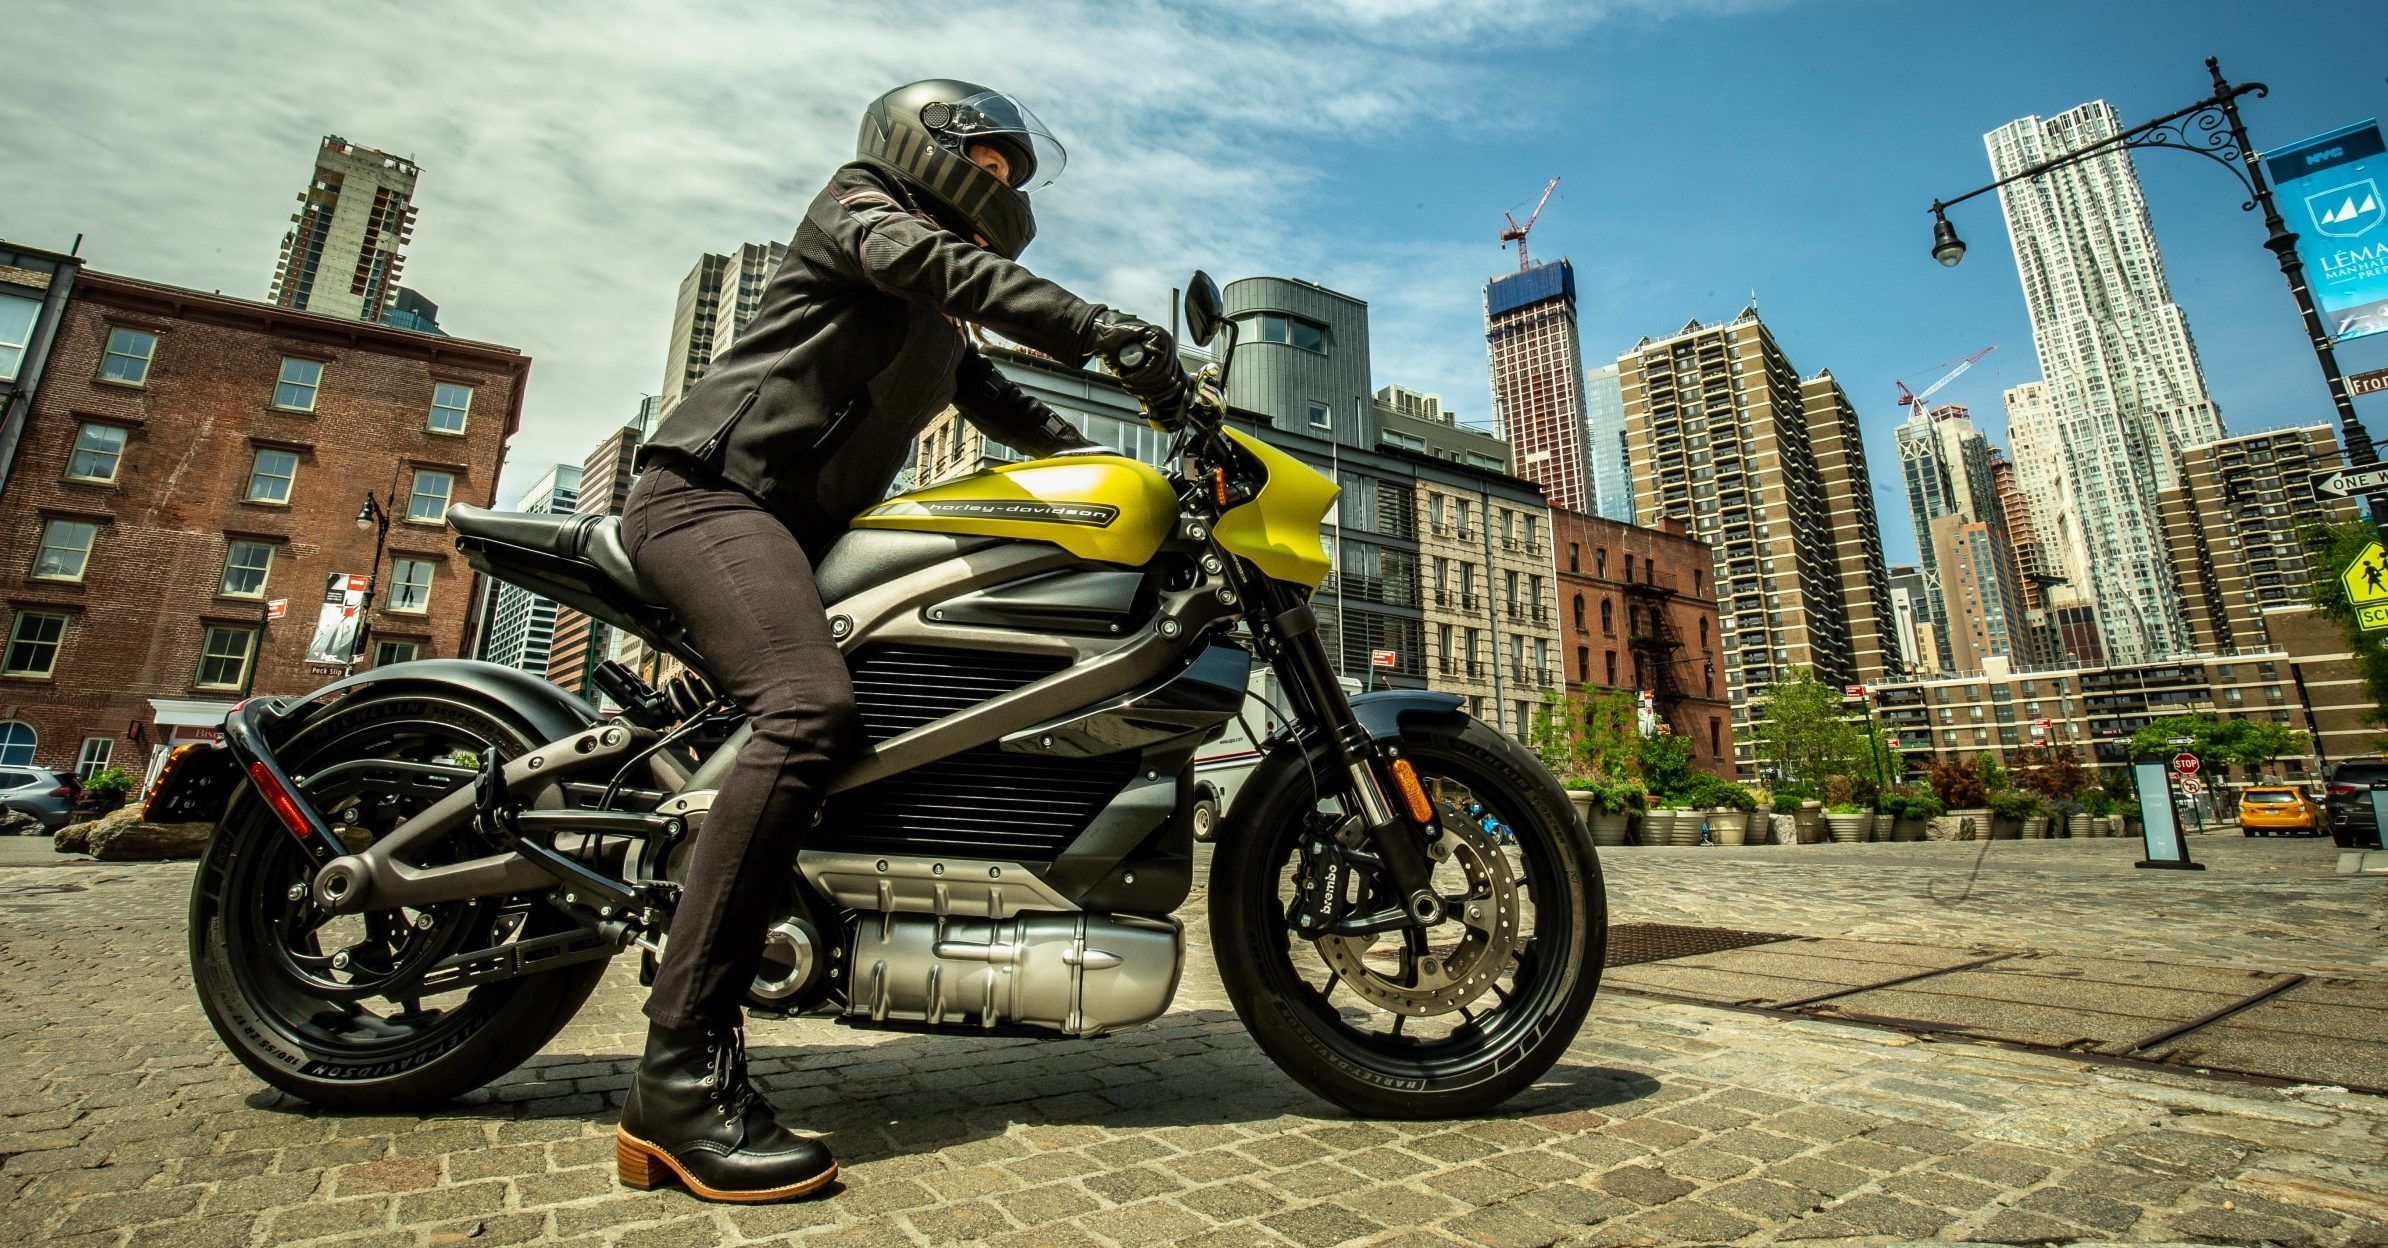 Harley goes electric with LiveWire